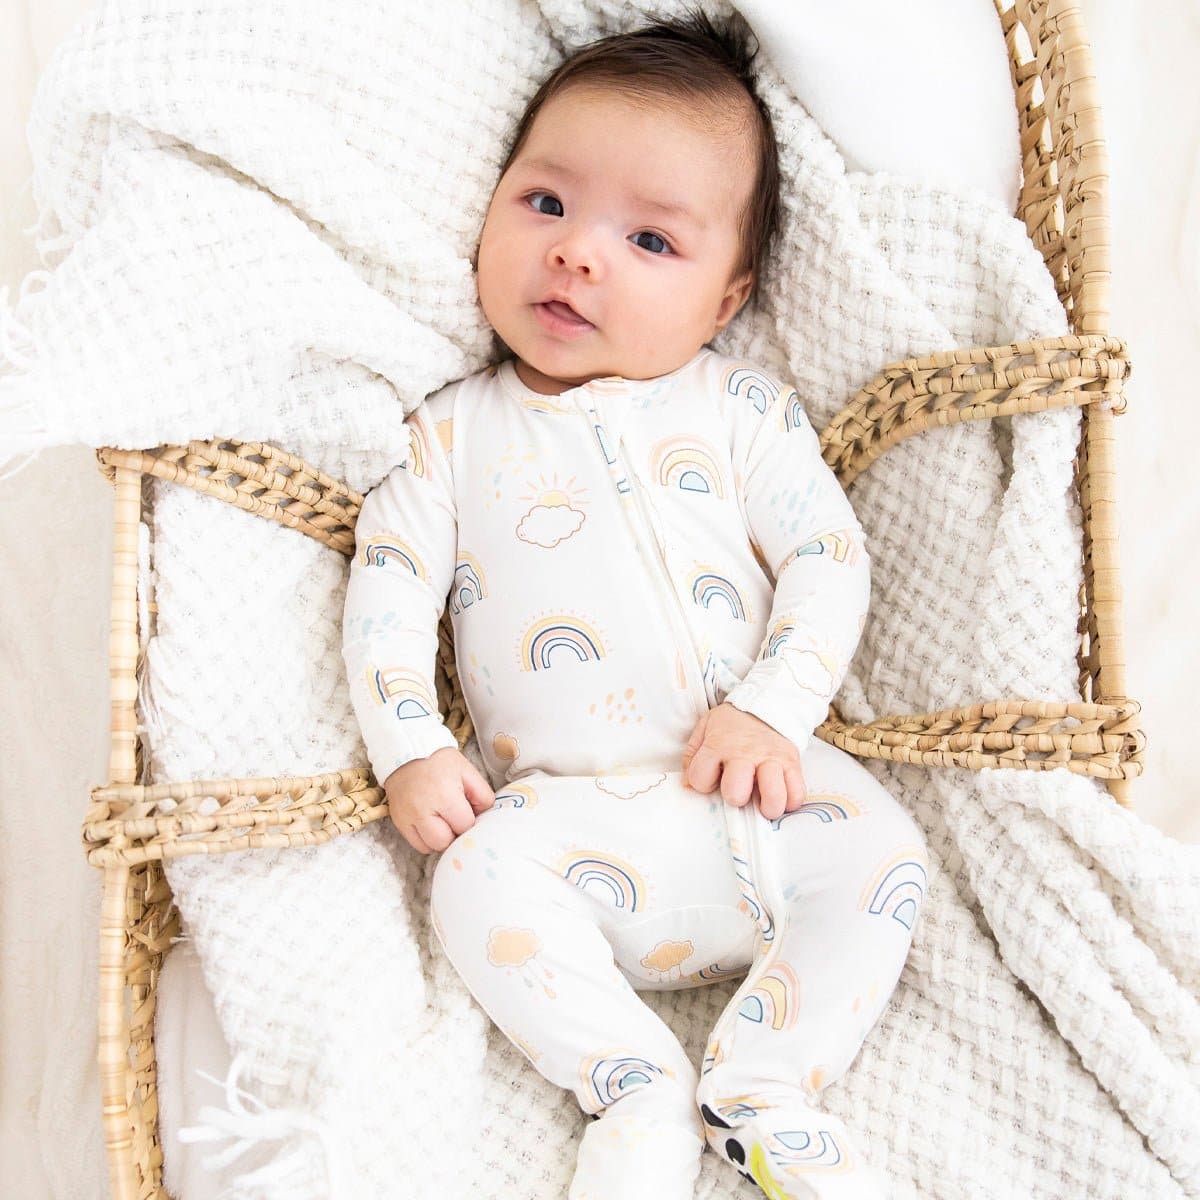 Selecting the Right Bamboo Baby Clothes